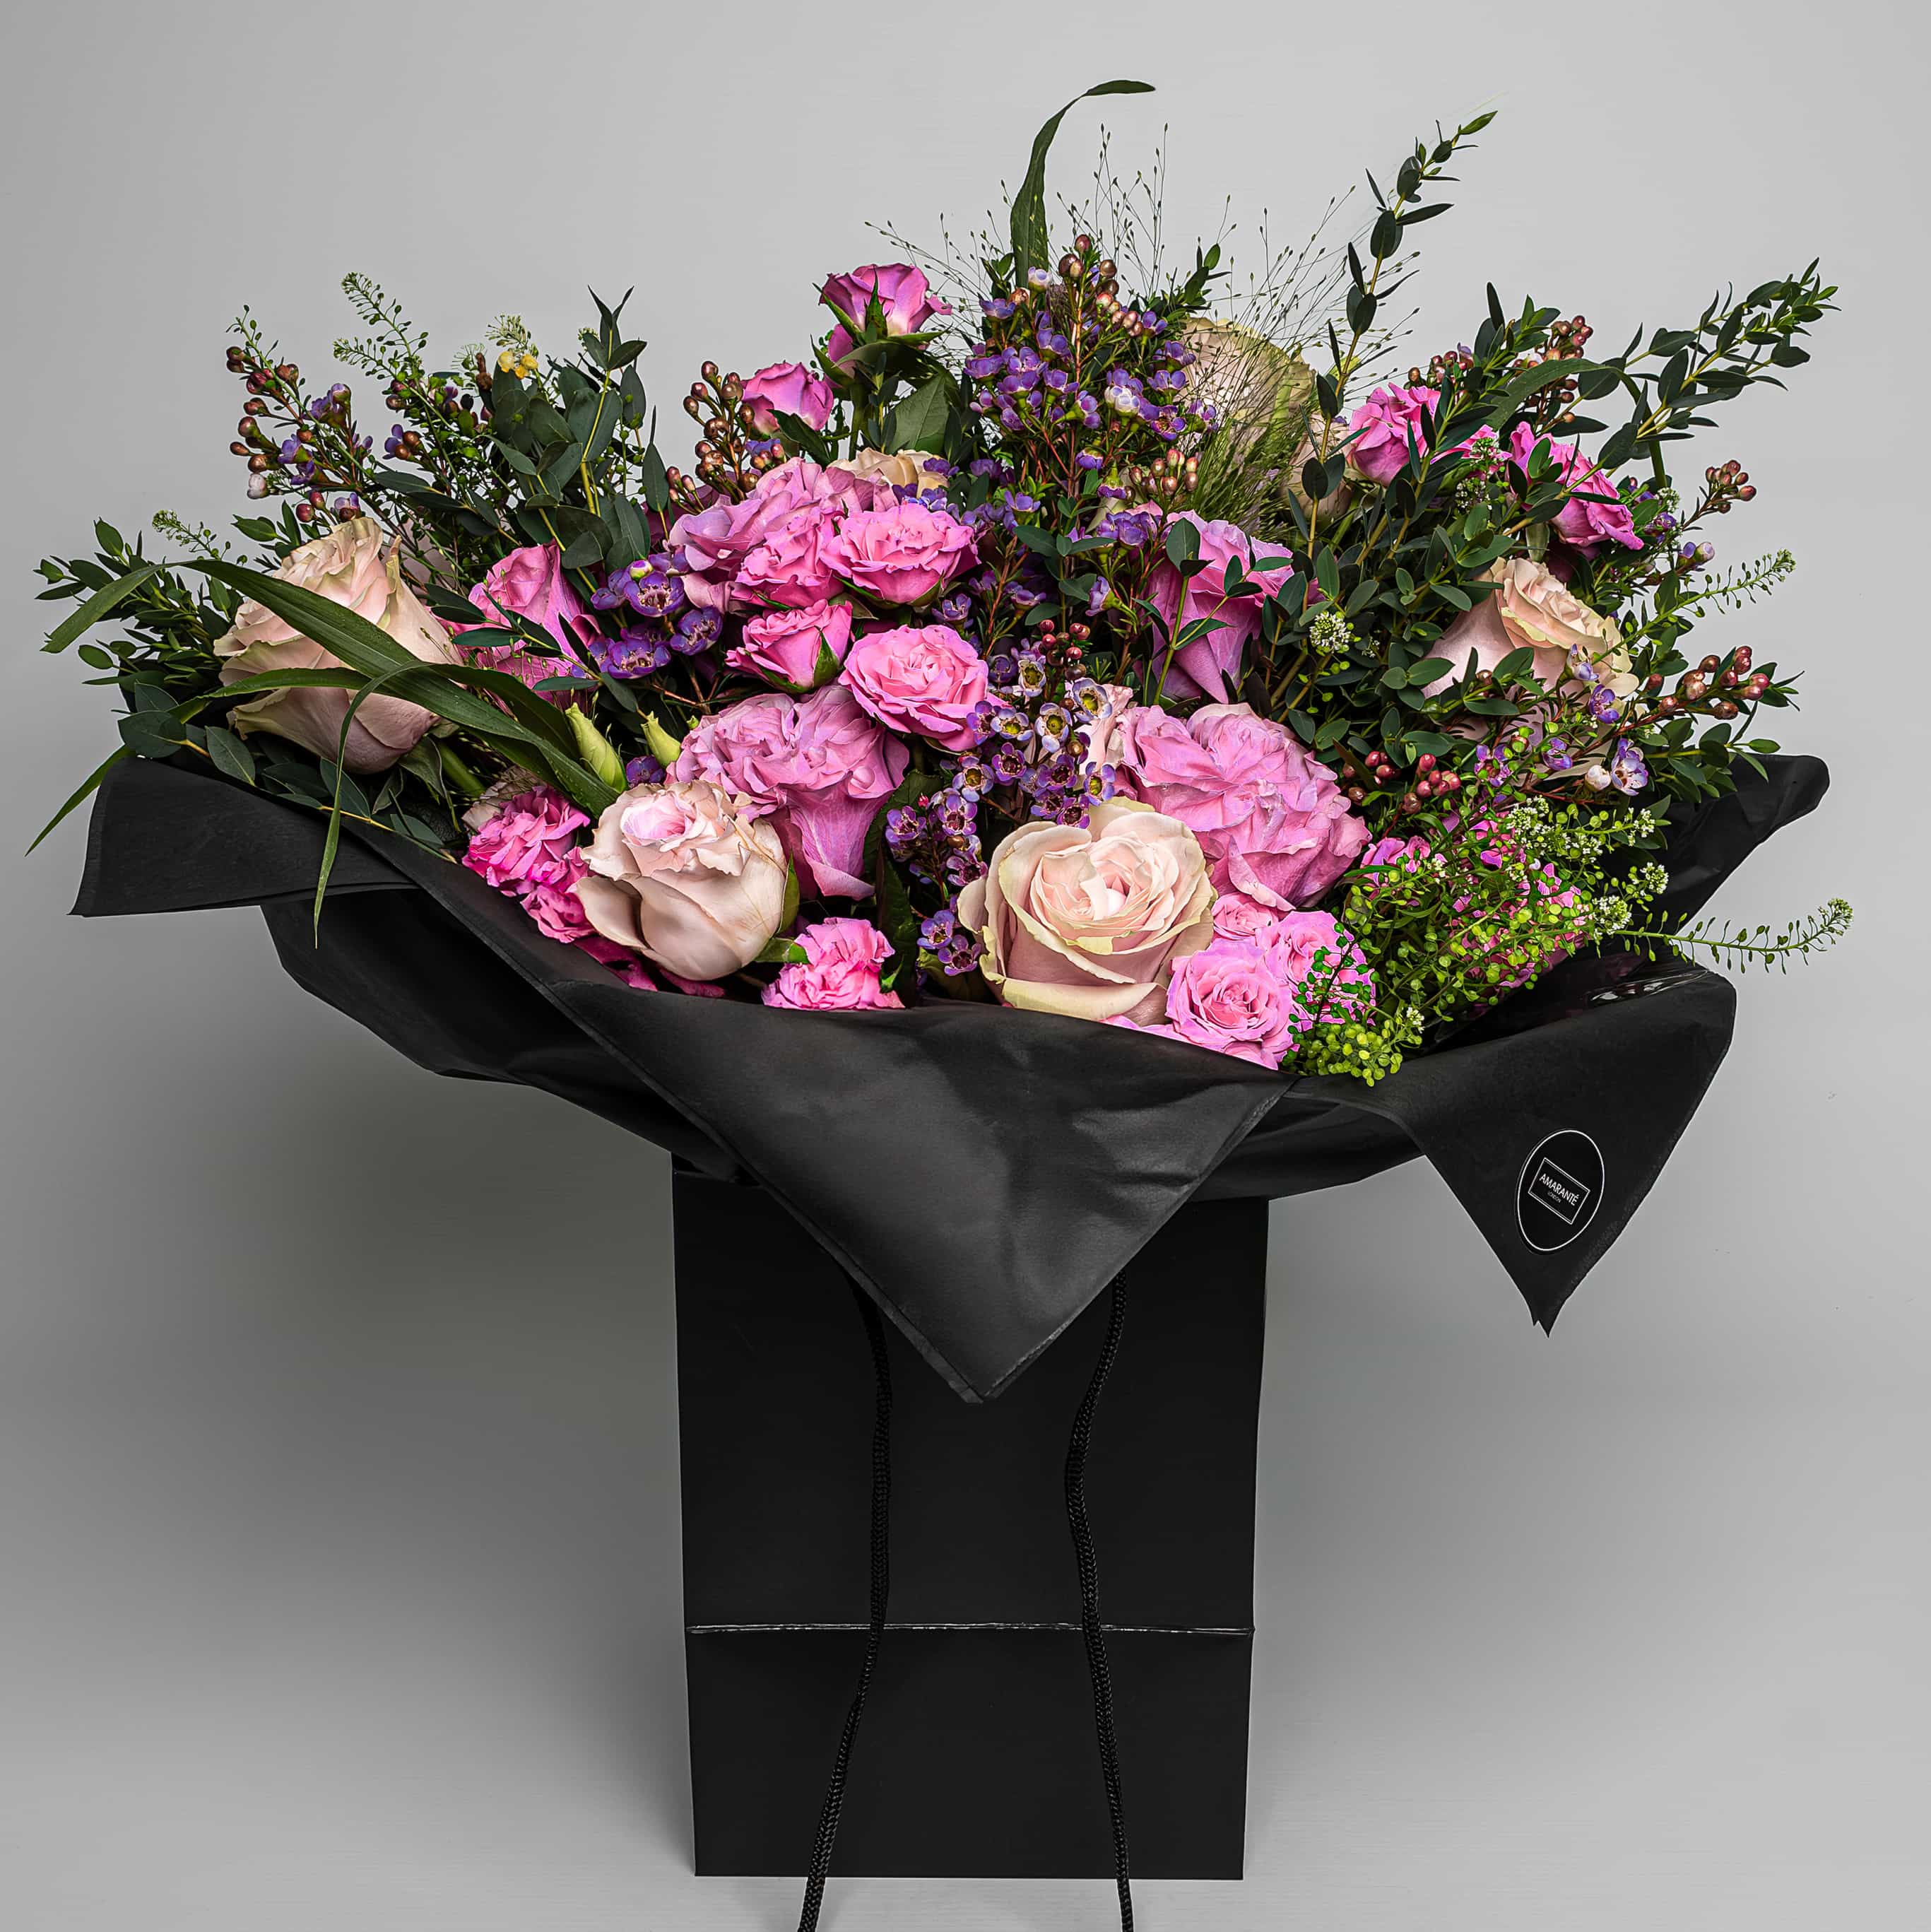 Exquisite Valentine's Day Bouquet of fresh, vibrant pink roses artfully arranged with stems and lavish green leaves. Convey your affection with this sophisticated, luxury bouquet boasting timeless elegance. Perfect for mesmerising your loved one this Vday. Free UK Delivery. Image source: Amarante London.